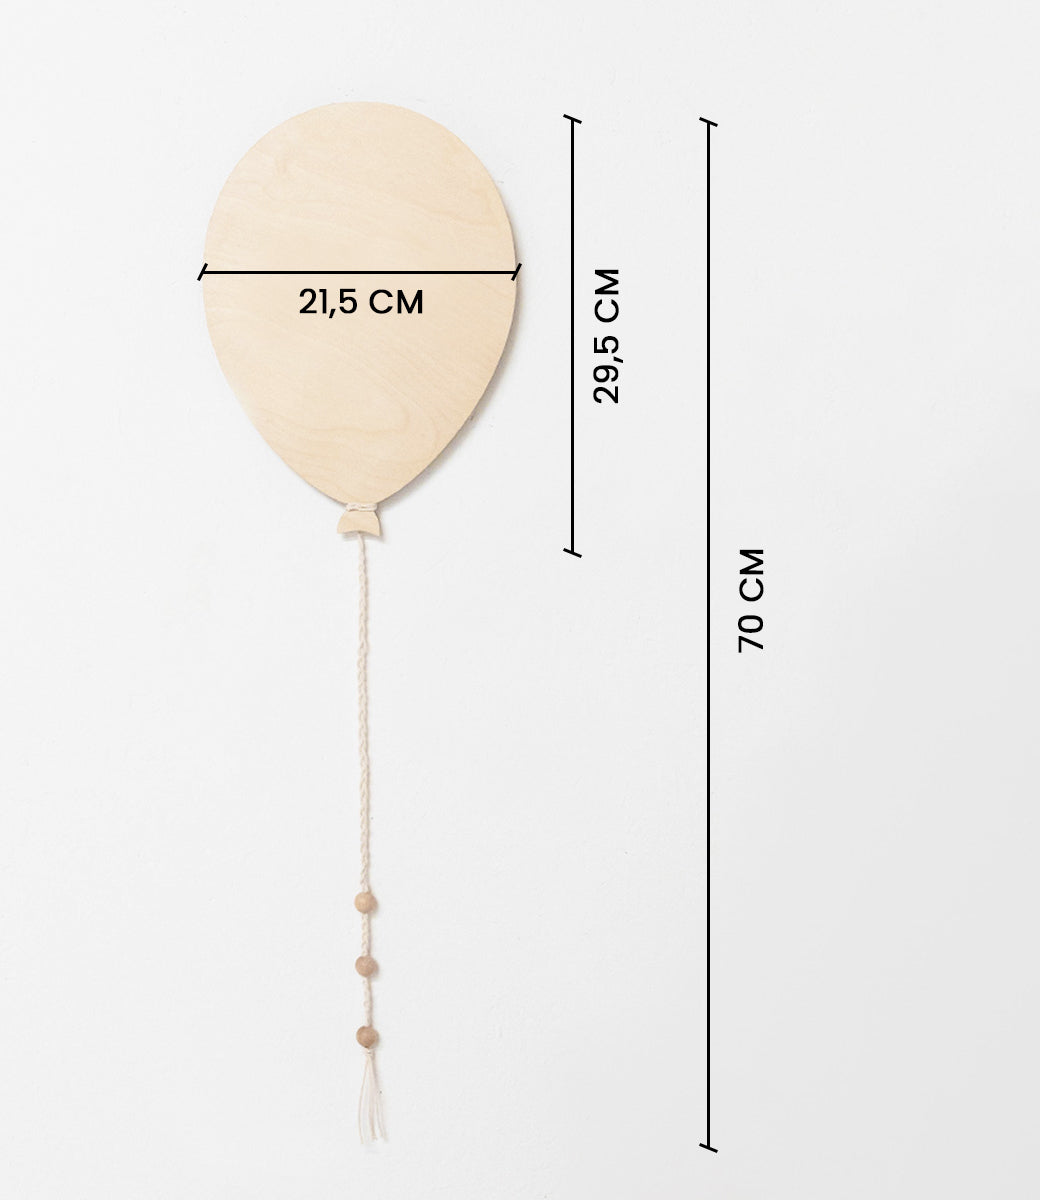 Wooden balloon // with name